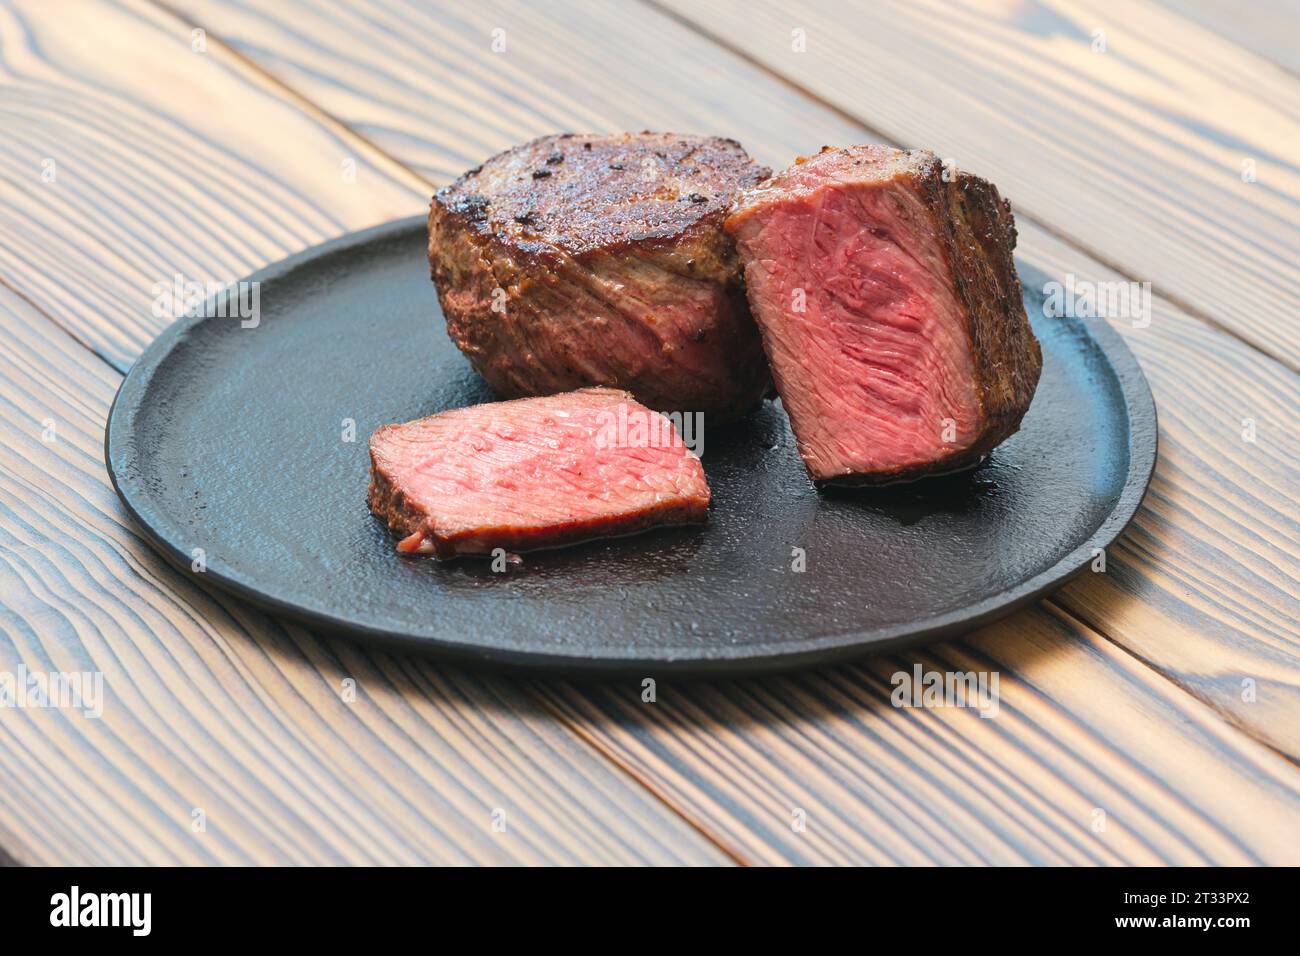 Pan seared fillet mignon on a plate Stock Photo